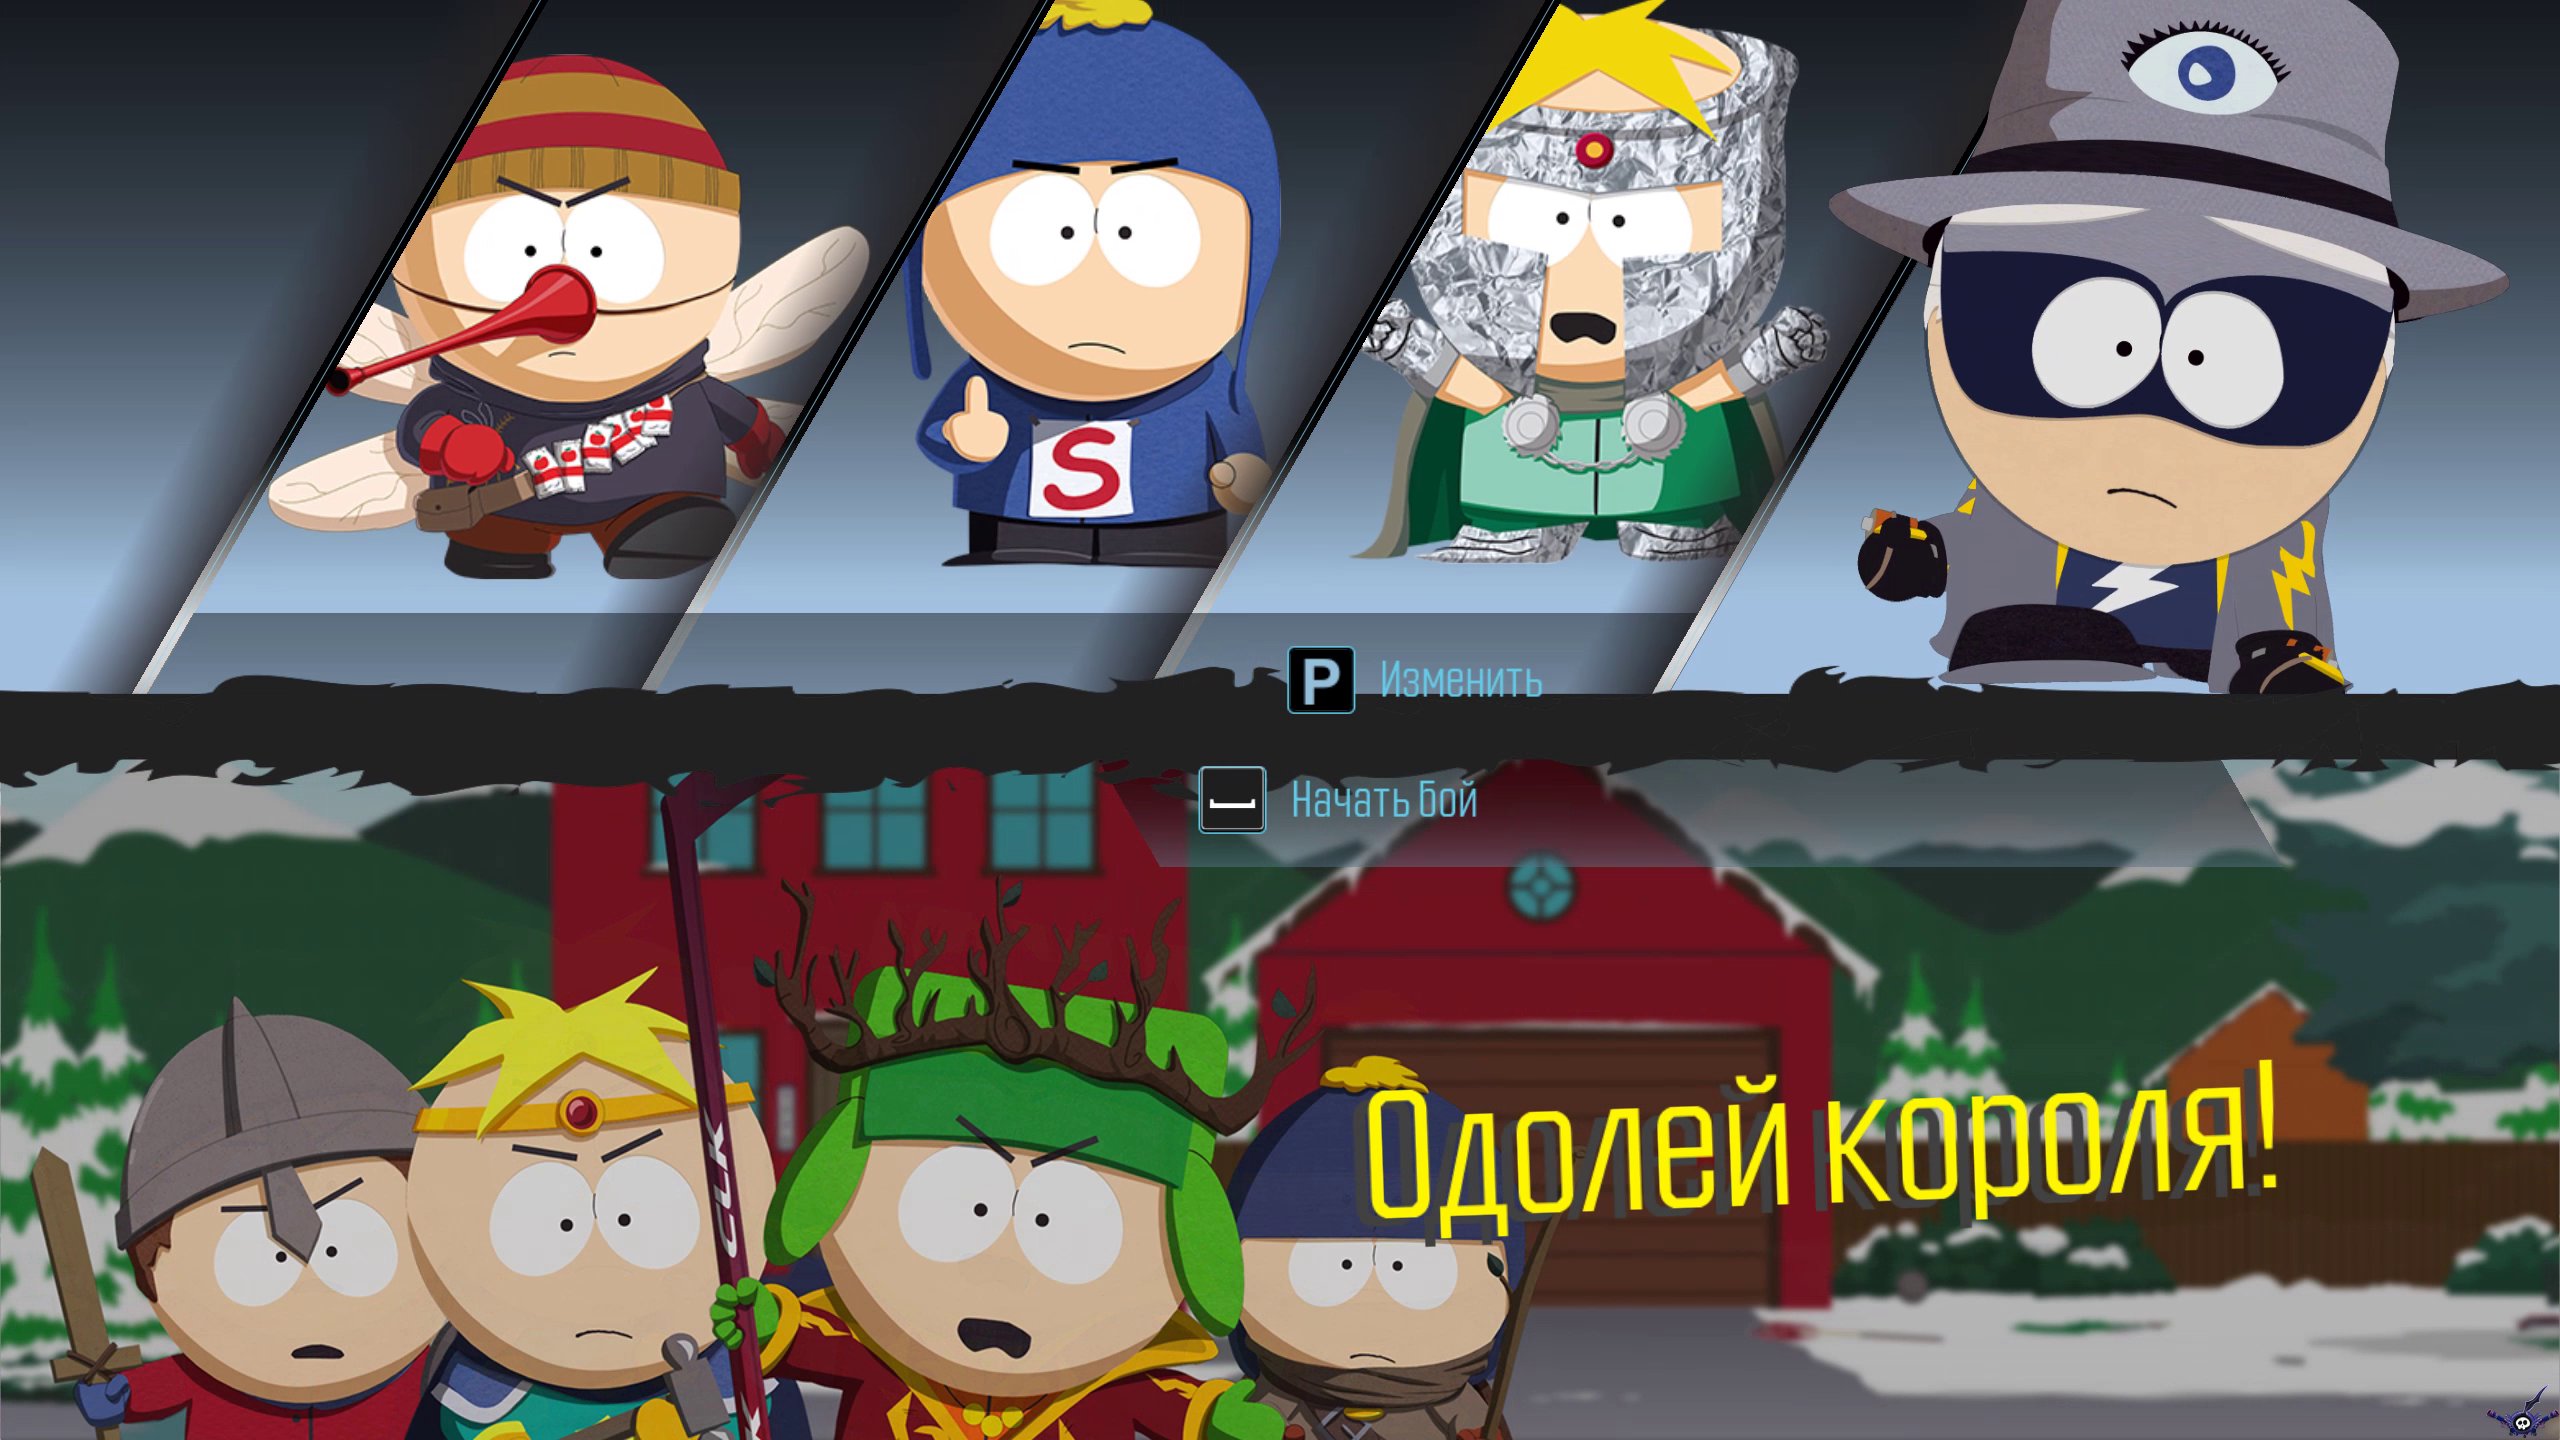 south-park-the-fractured-but-whole-screenshot